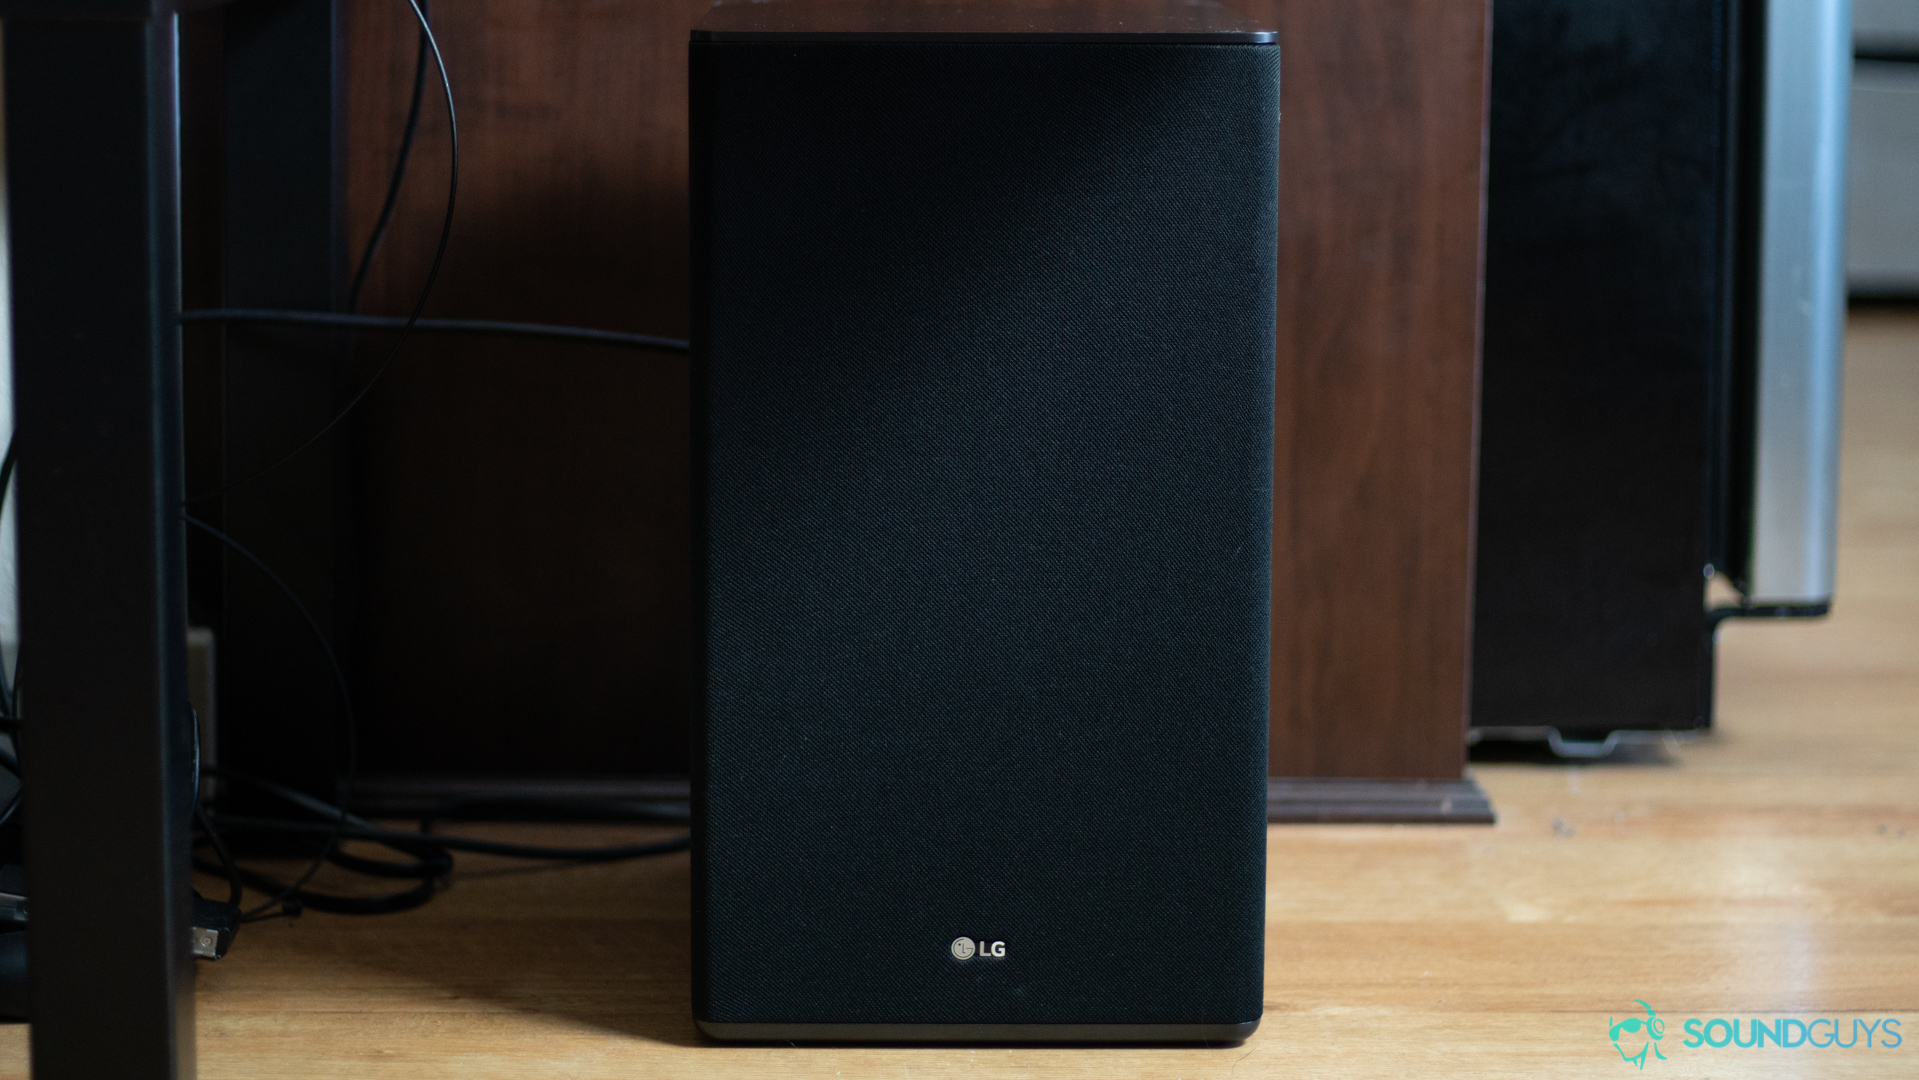 The subwoofer of the SK10Y pictured on the floor.